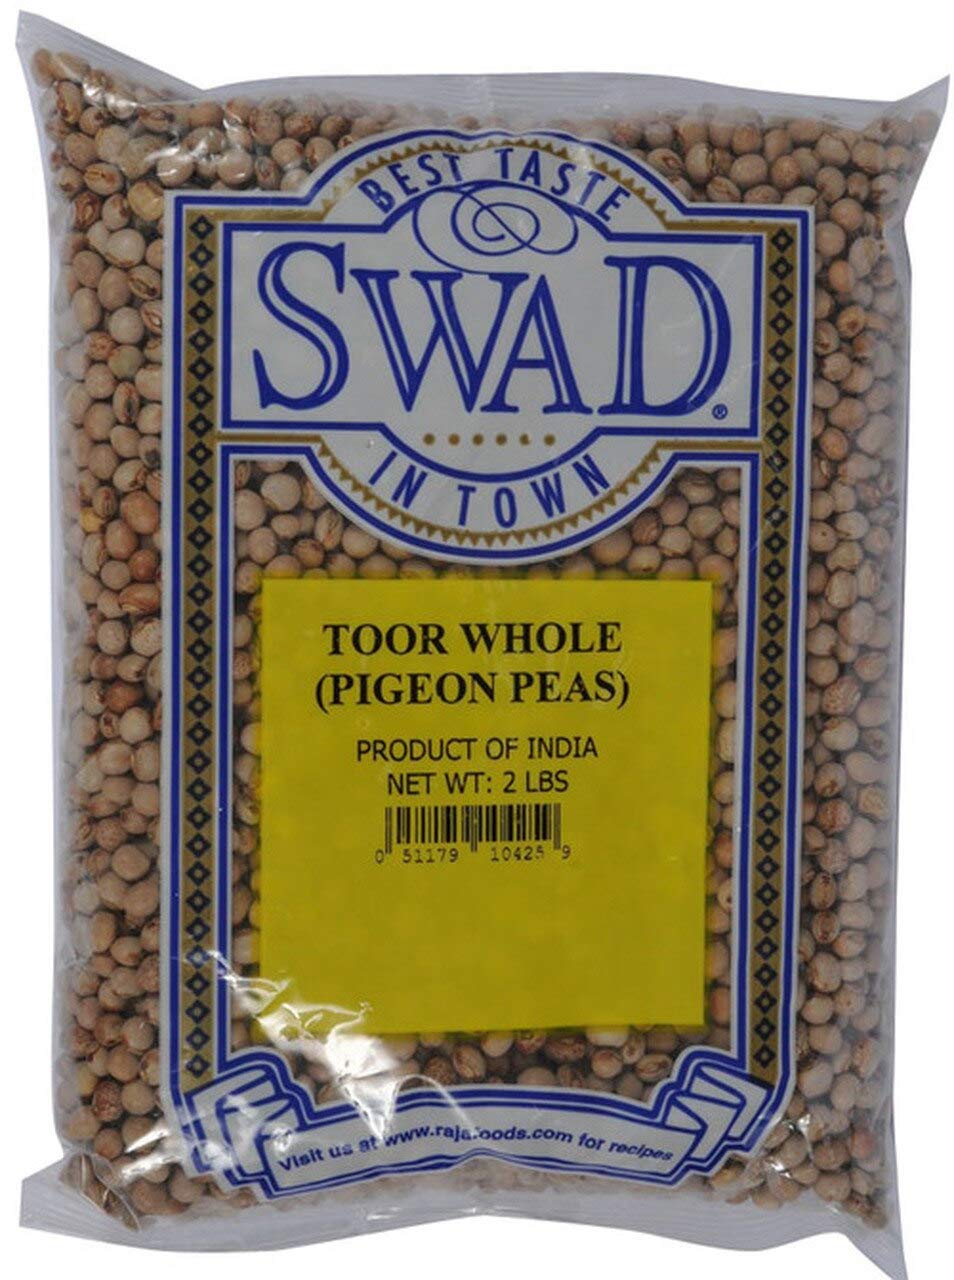 Swad Toor (Pigeon Peas) Whole, Indian Groceries - 2lb., 908g.